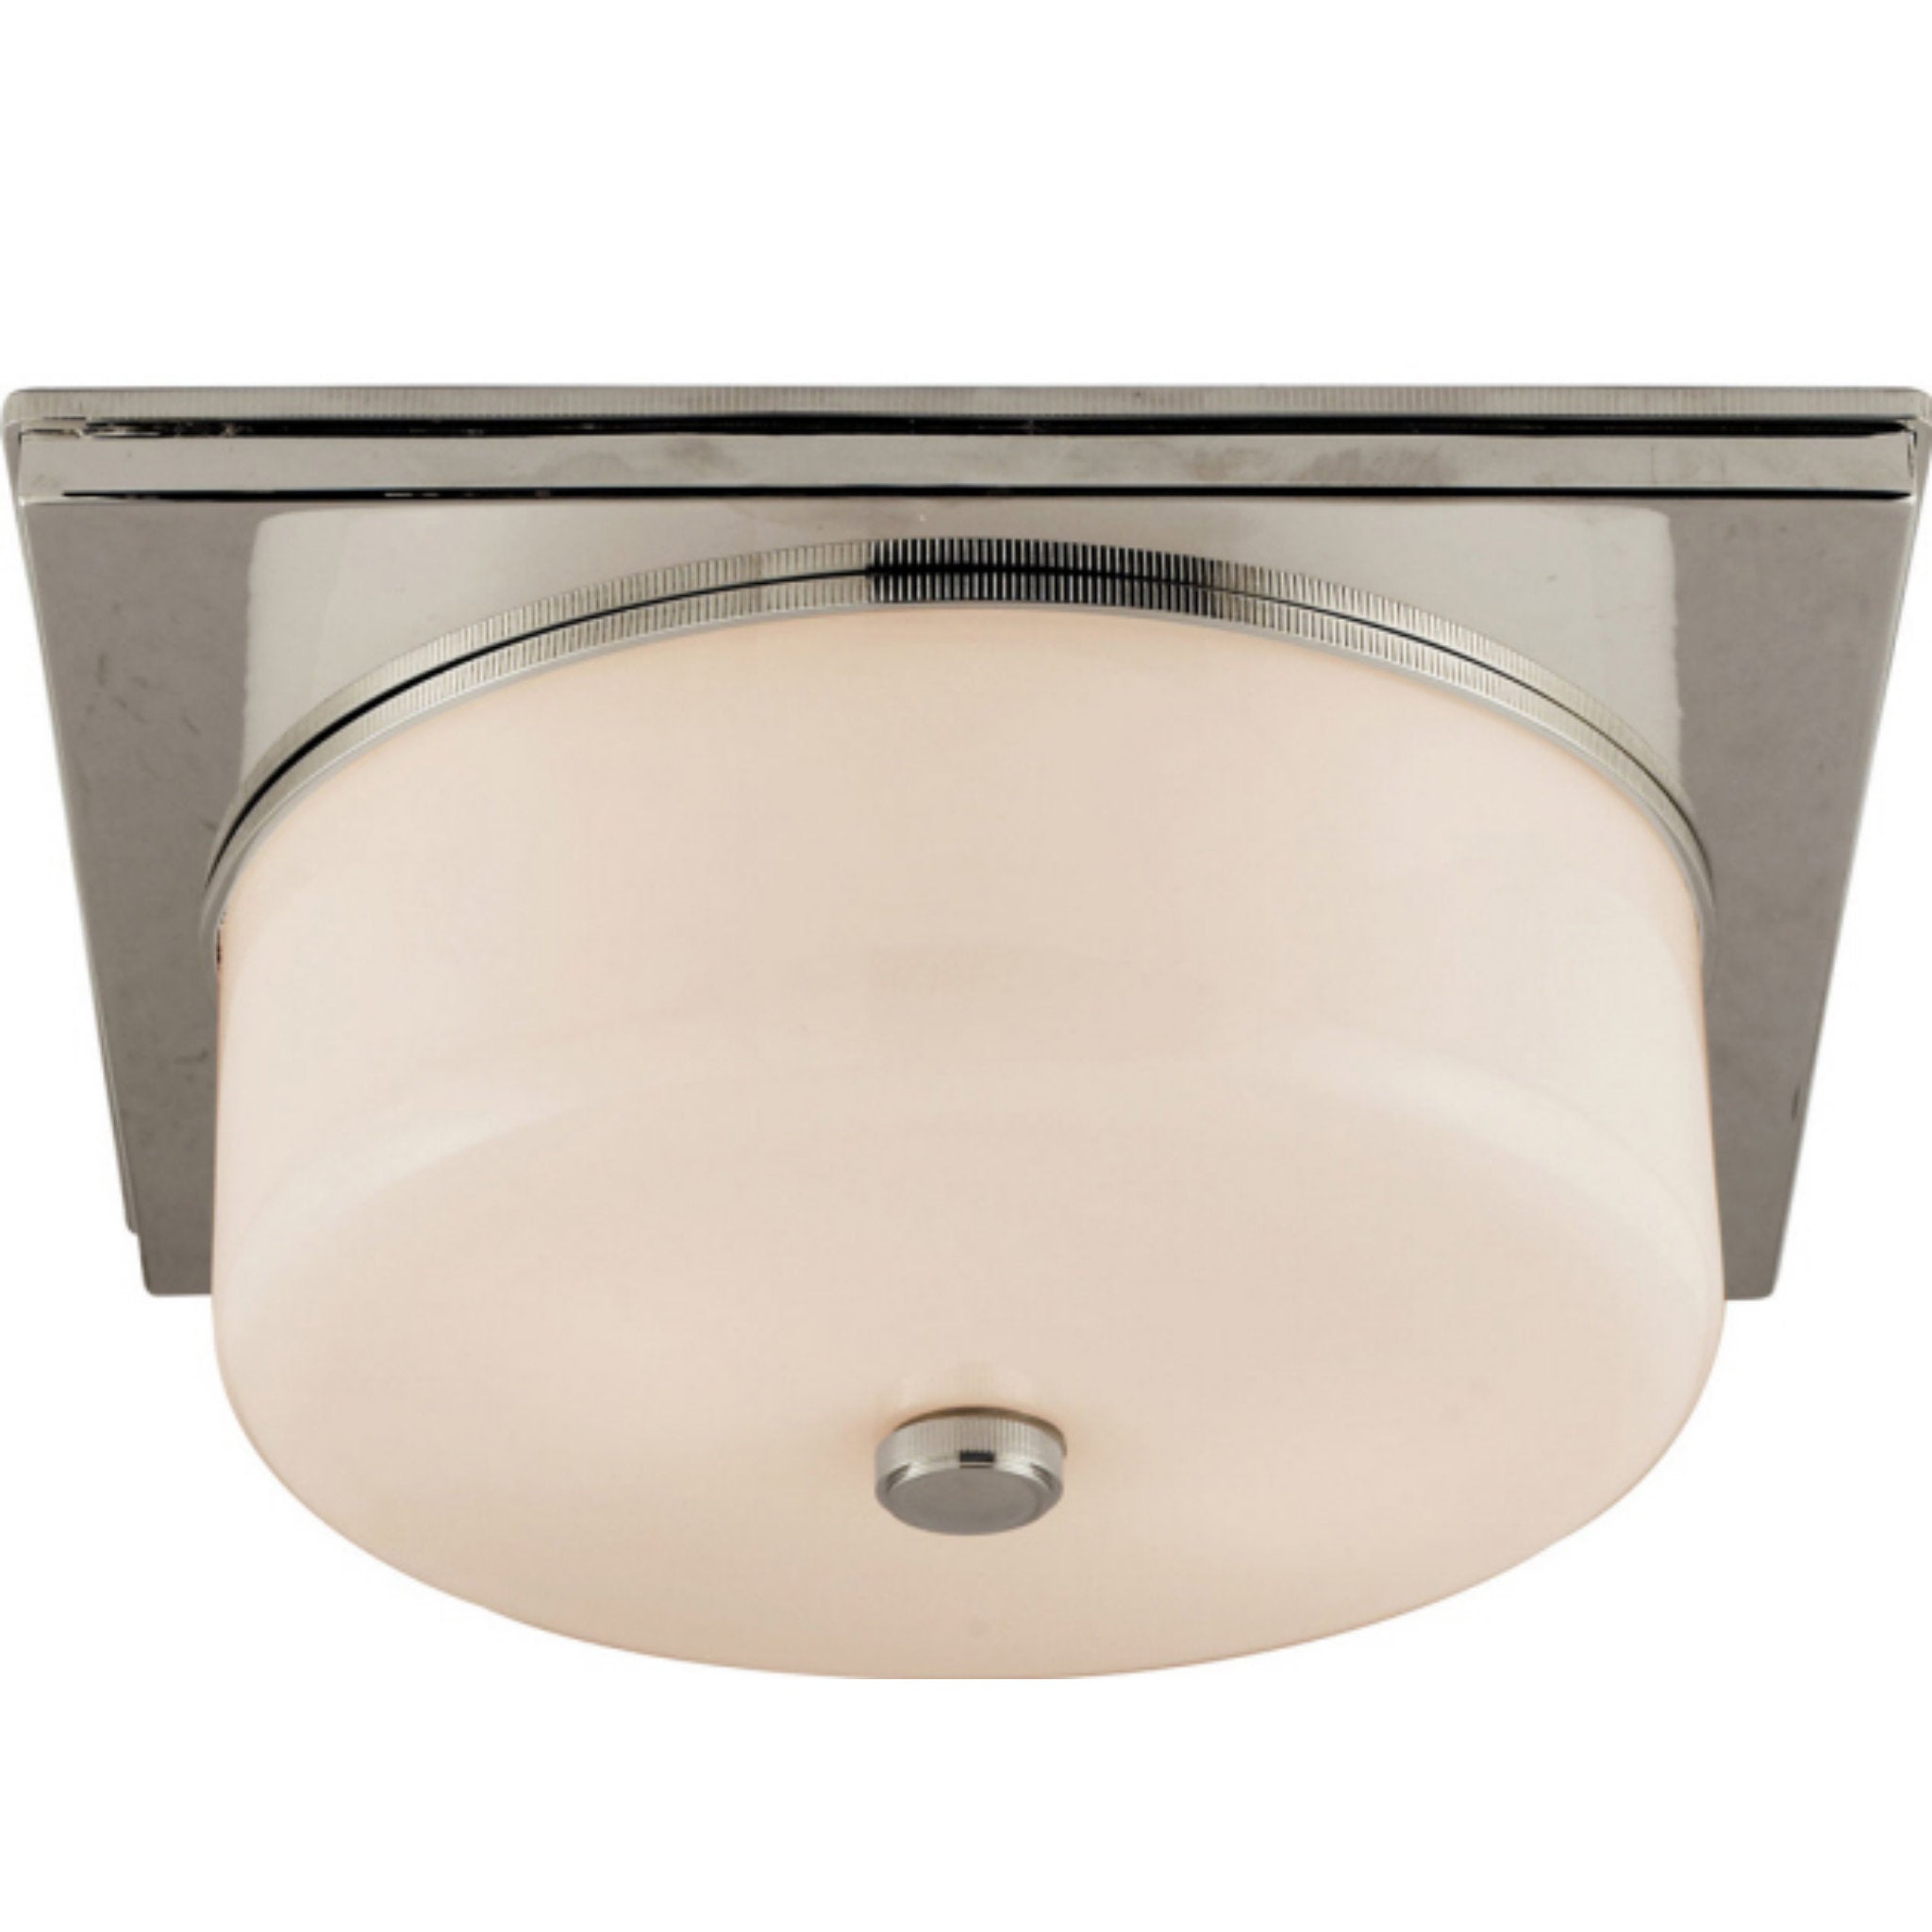 Thomas O'Brien Newhouse Circular Flush Mount in Polished Nickel with White Glass